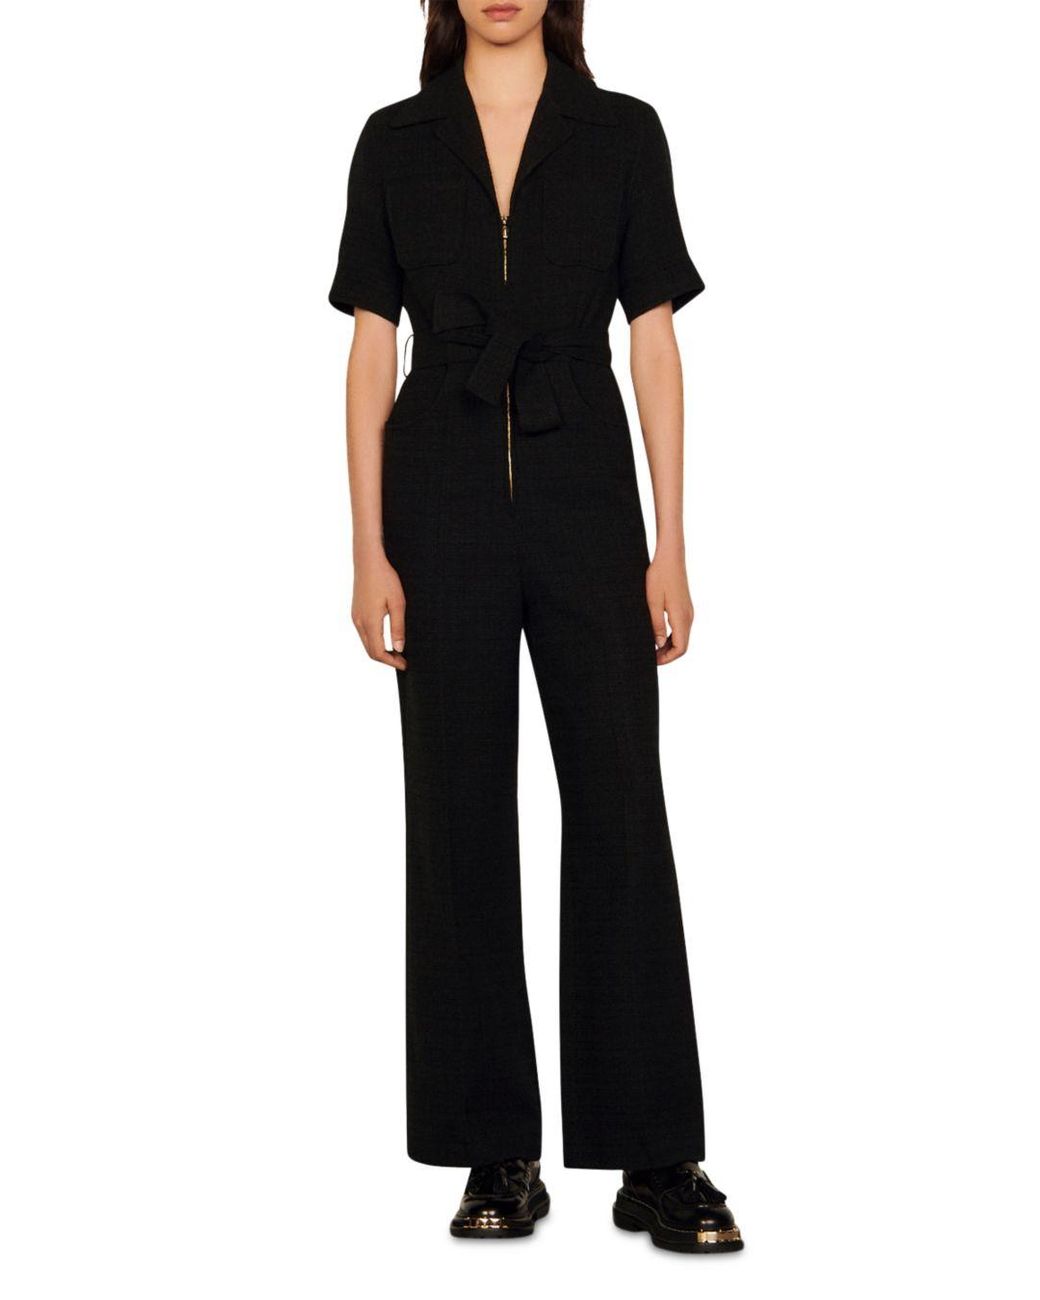 Sandro Nora Belted Zip Front Jumpsuit in Black | Lyst